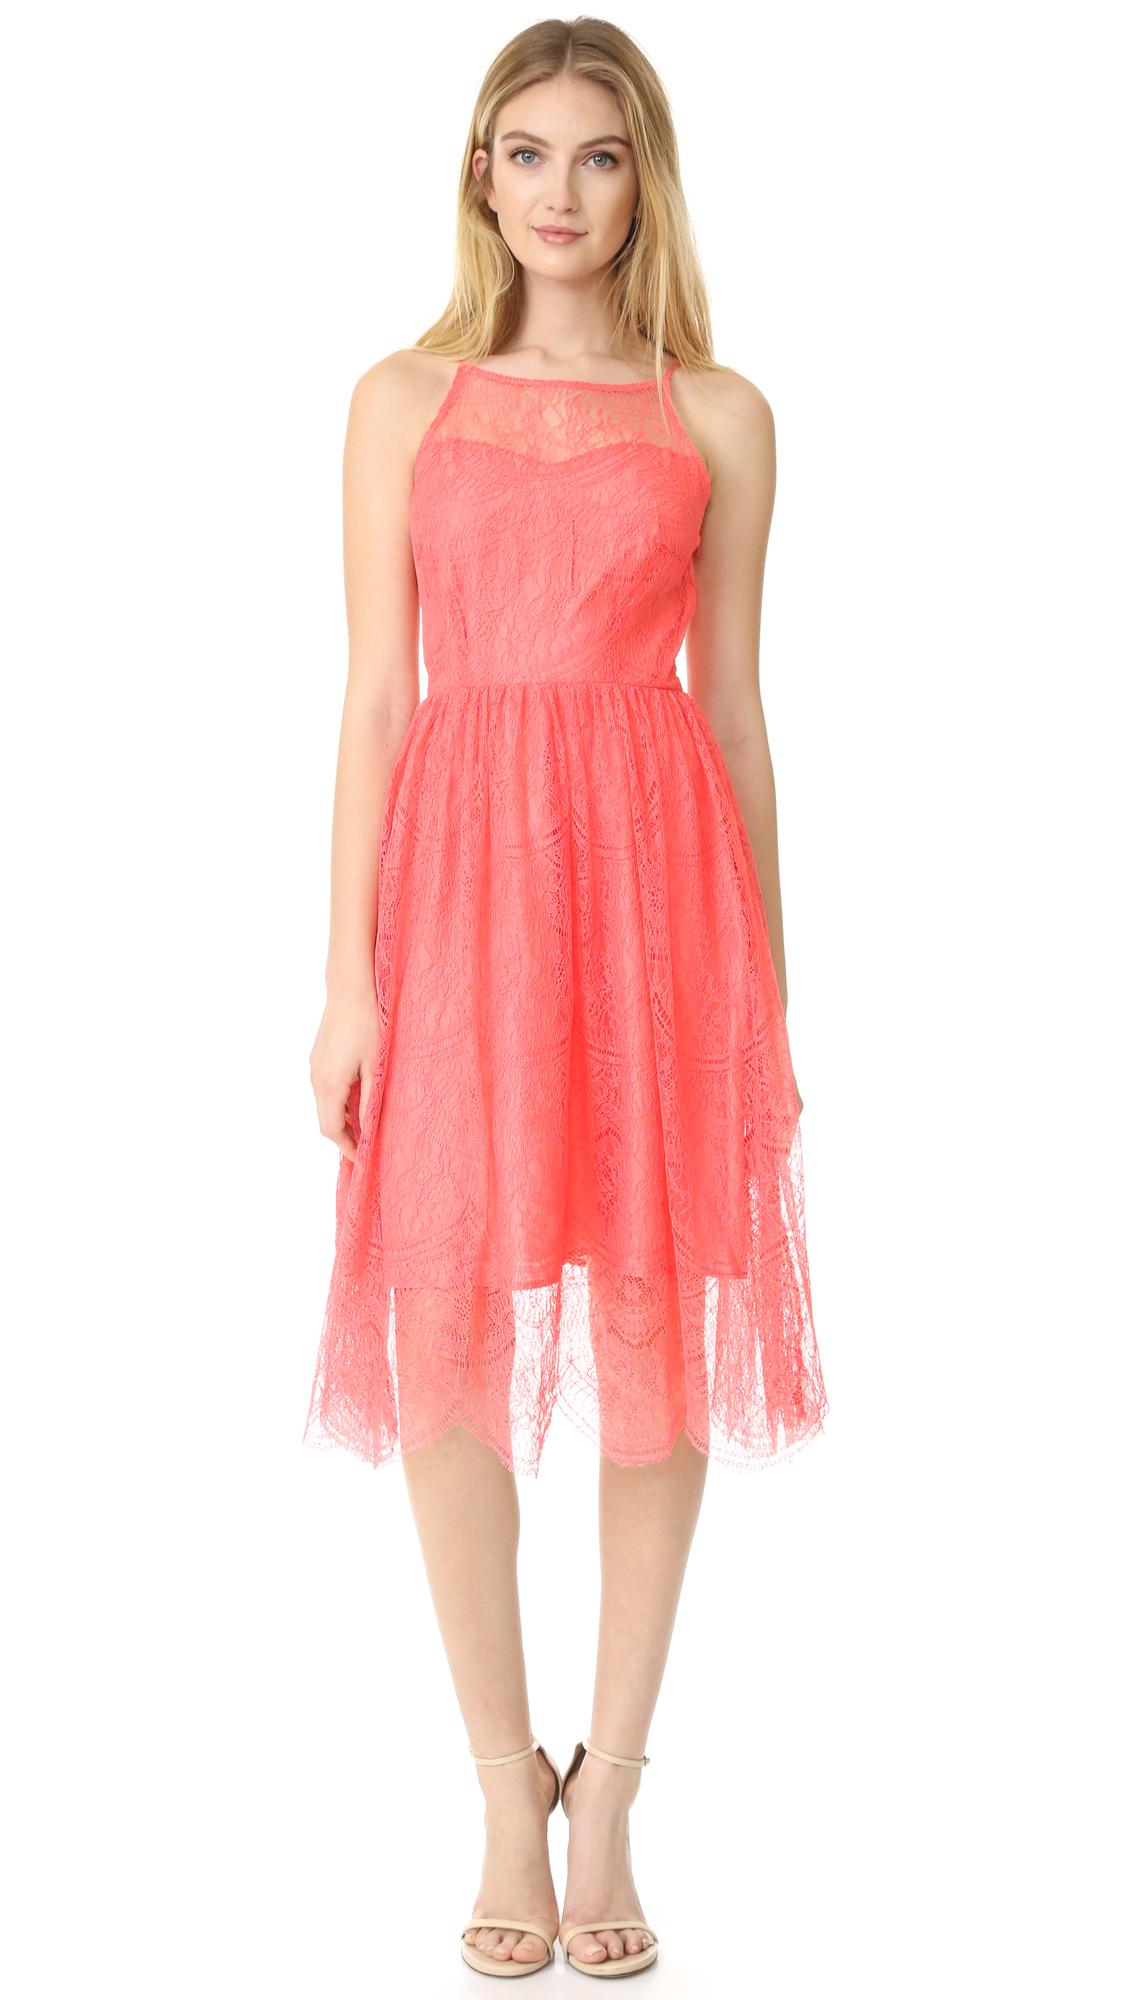 Lyst - Cupcakes And Cashmere Strady Lace Midi Dress in Pink